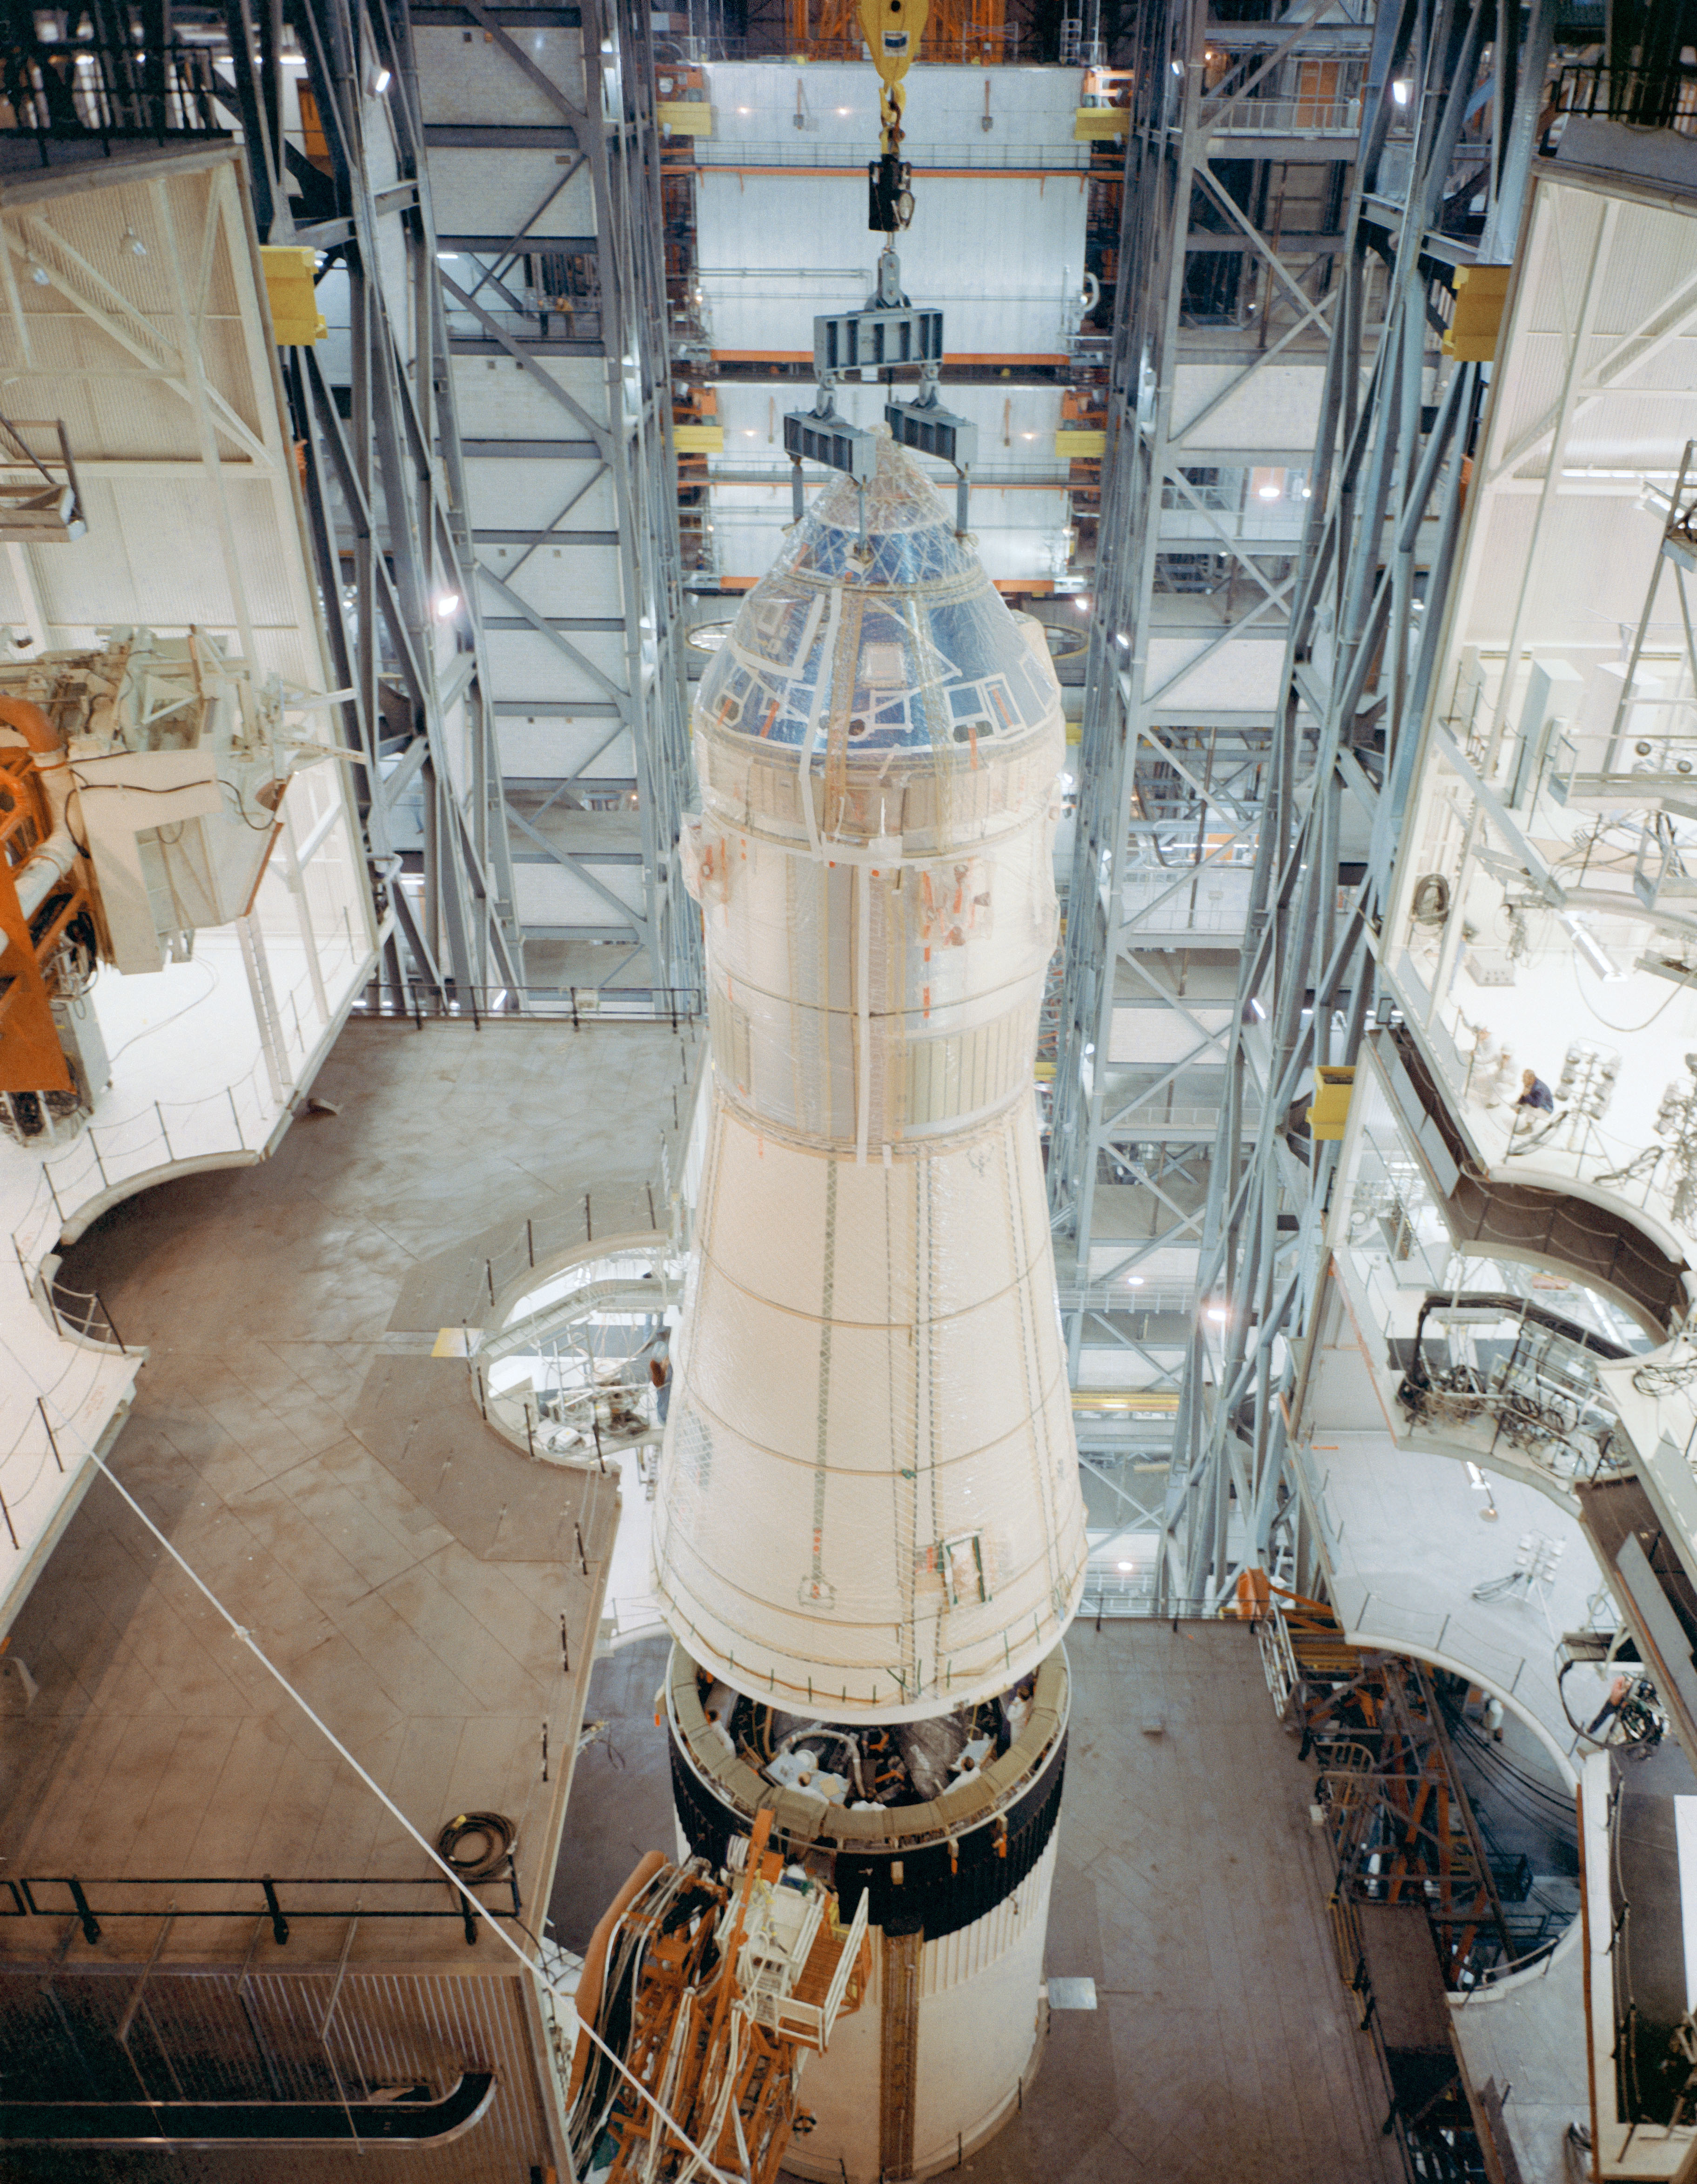 Workers lower the spacecraft onto the Saturn V rocket’s third stage